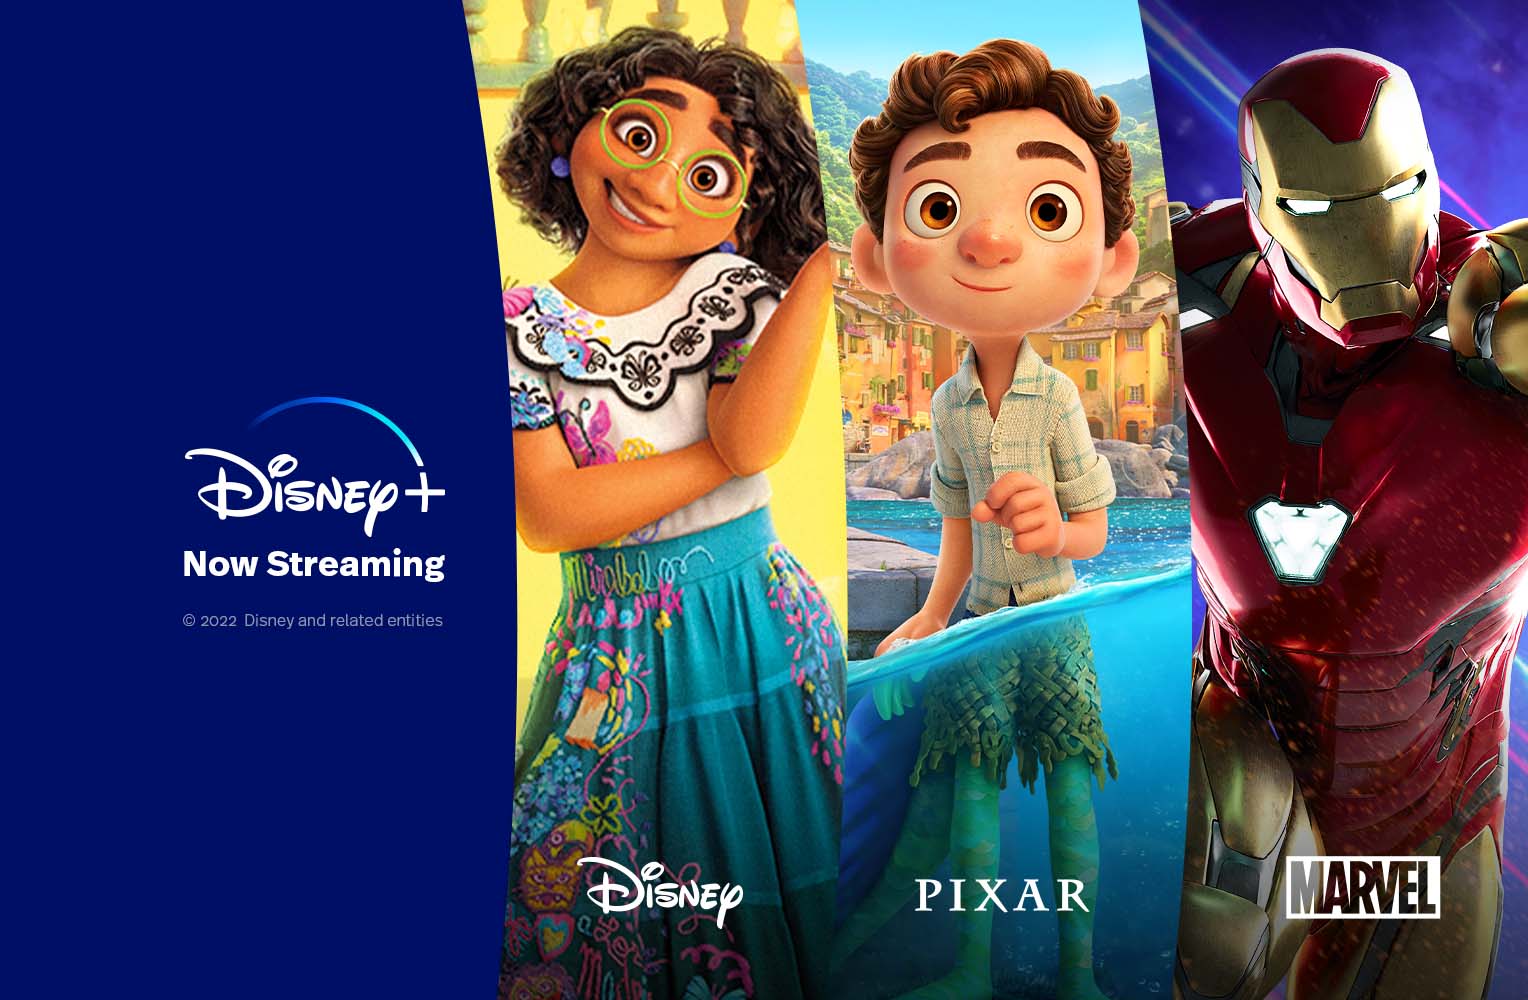 Promotional image of multiple entertainment options available on Disney Plus